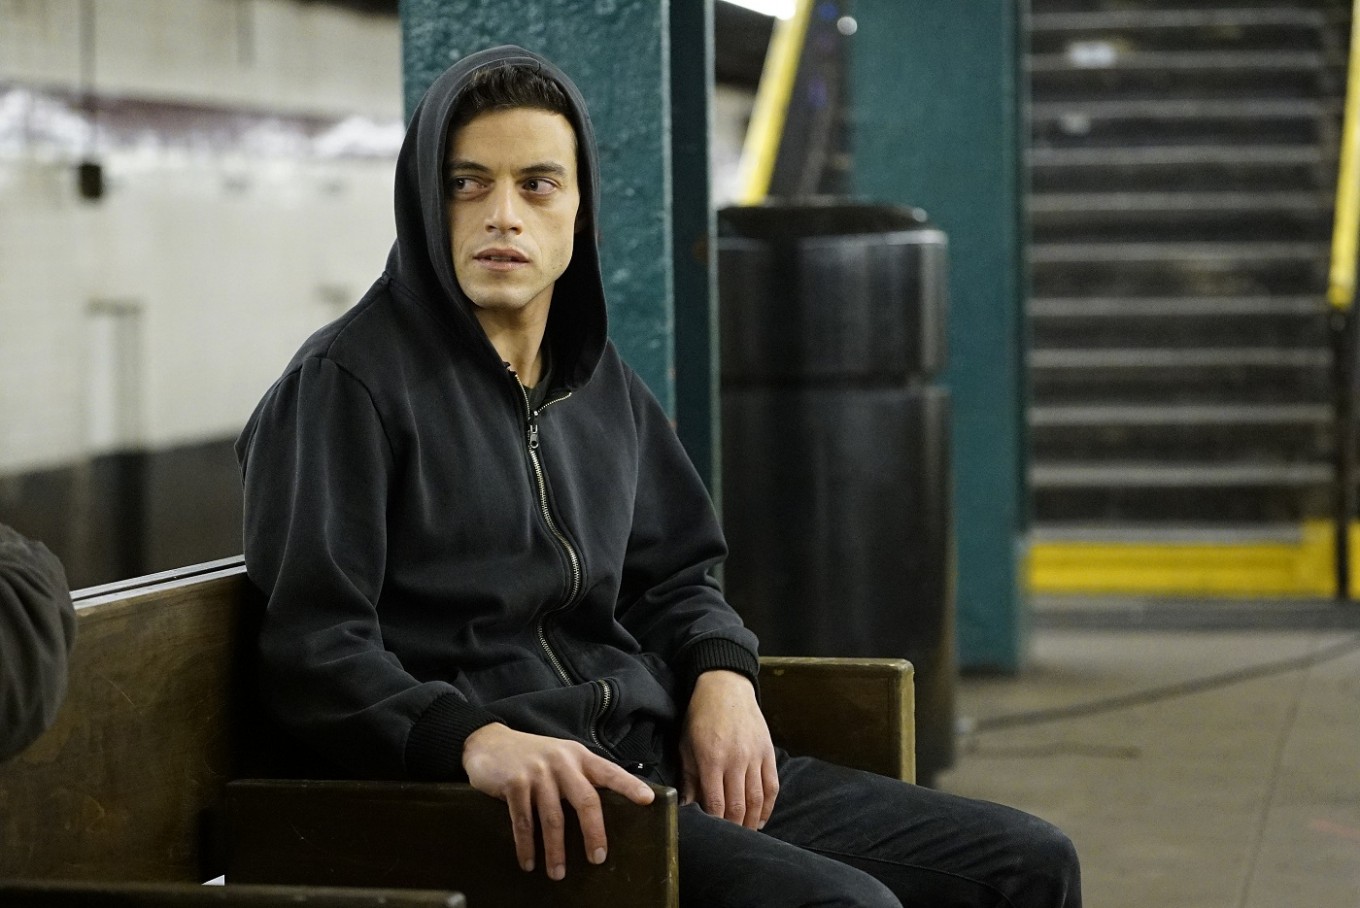 Tonight Mr. Robot is Going to Reveal 'Dream Device For Hackers